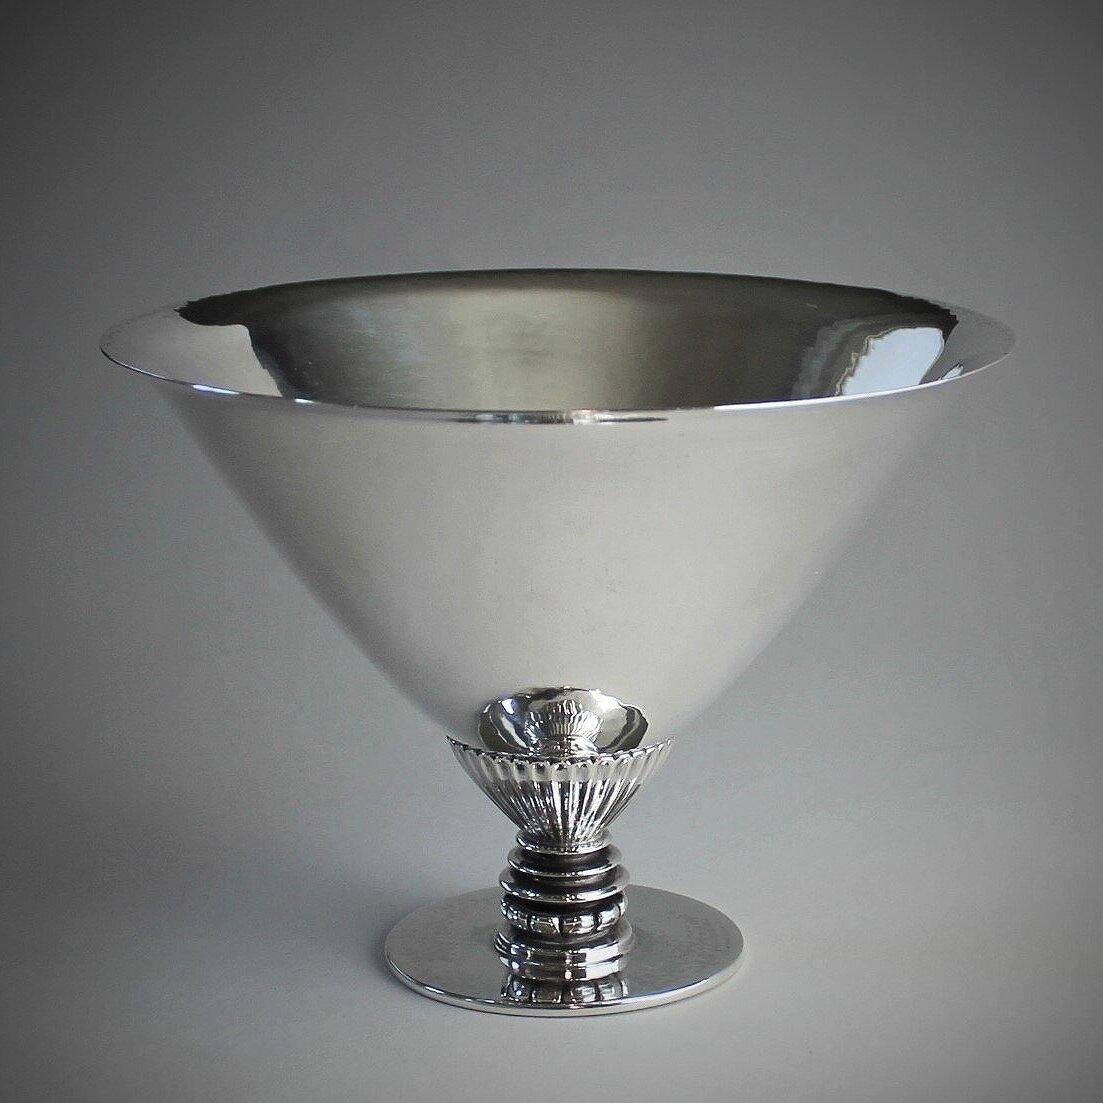 Georg Jensen sterling silver triangular hammered bowl, No259 by Gundorph Albertus

A similar example can be seen in the book Georg Jensen Holloware, The Silver Fund Collection by David Taylor and Jason Laskey, pg 119

Designer: Gundorph